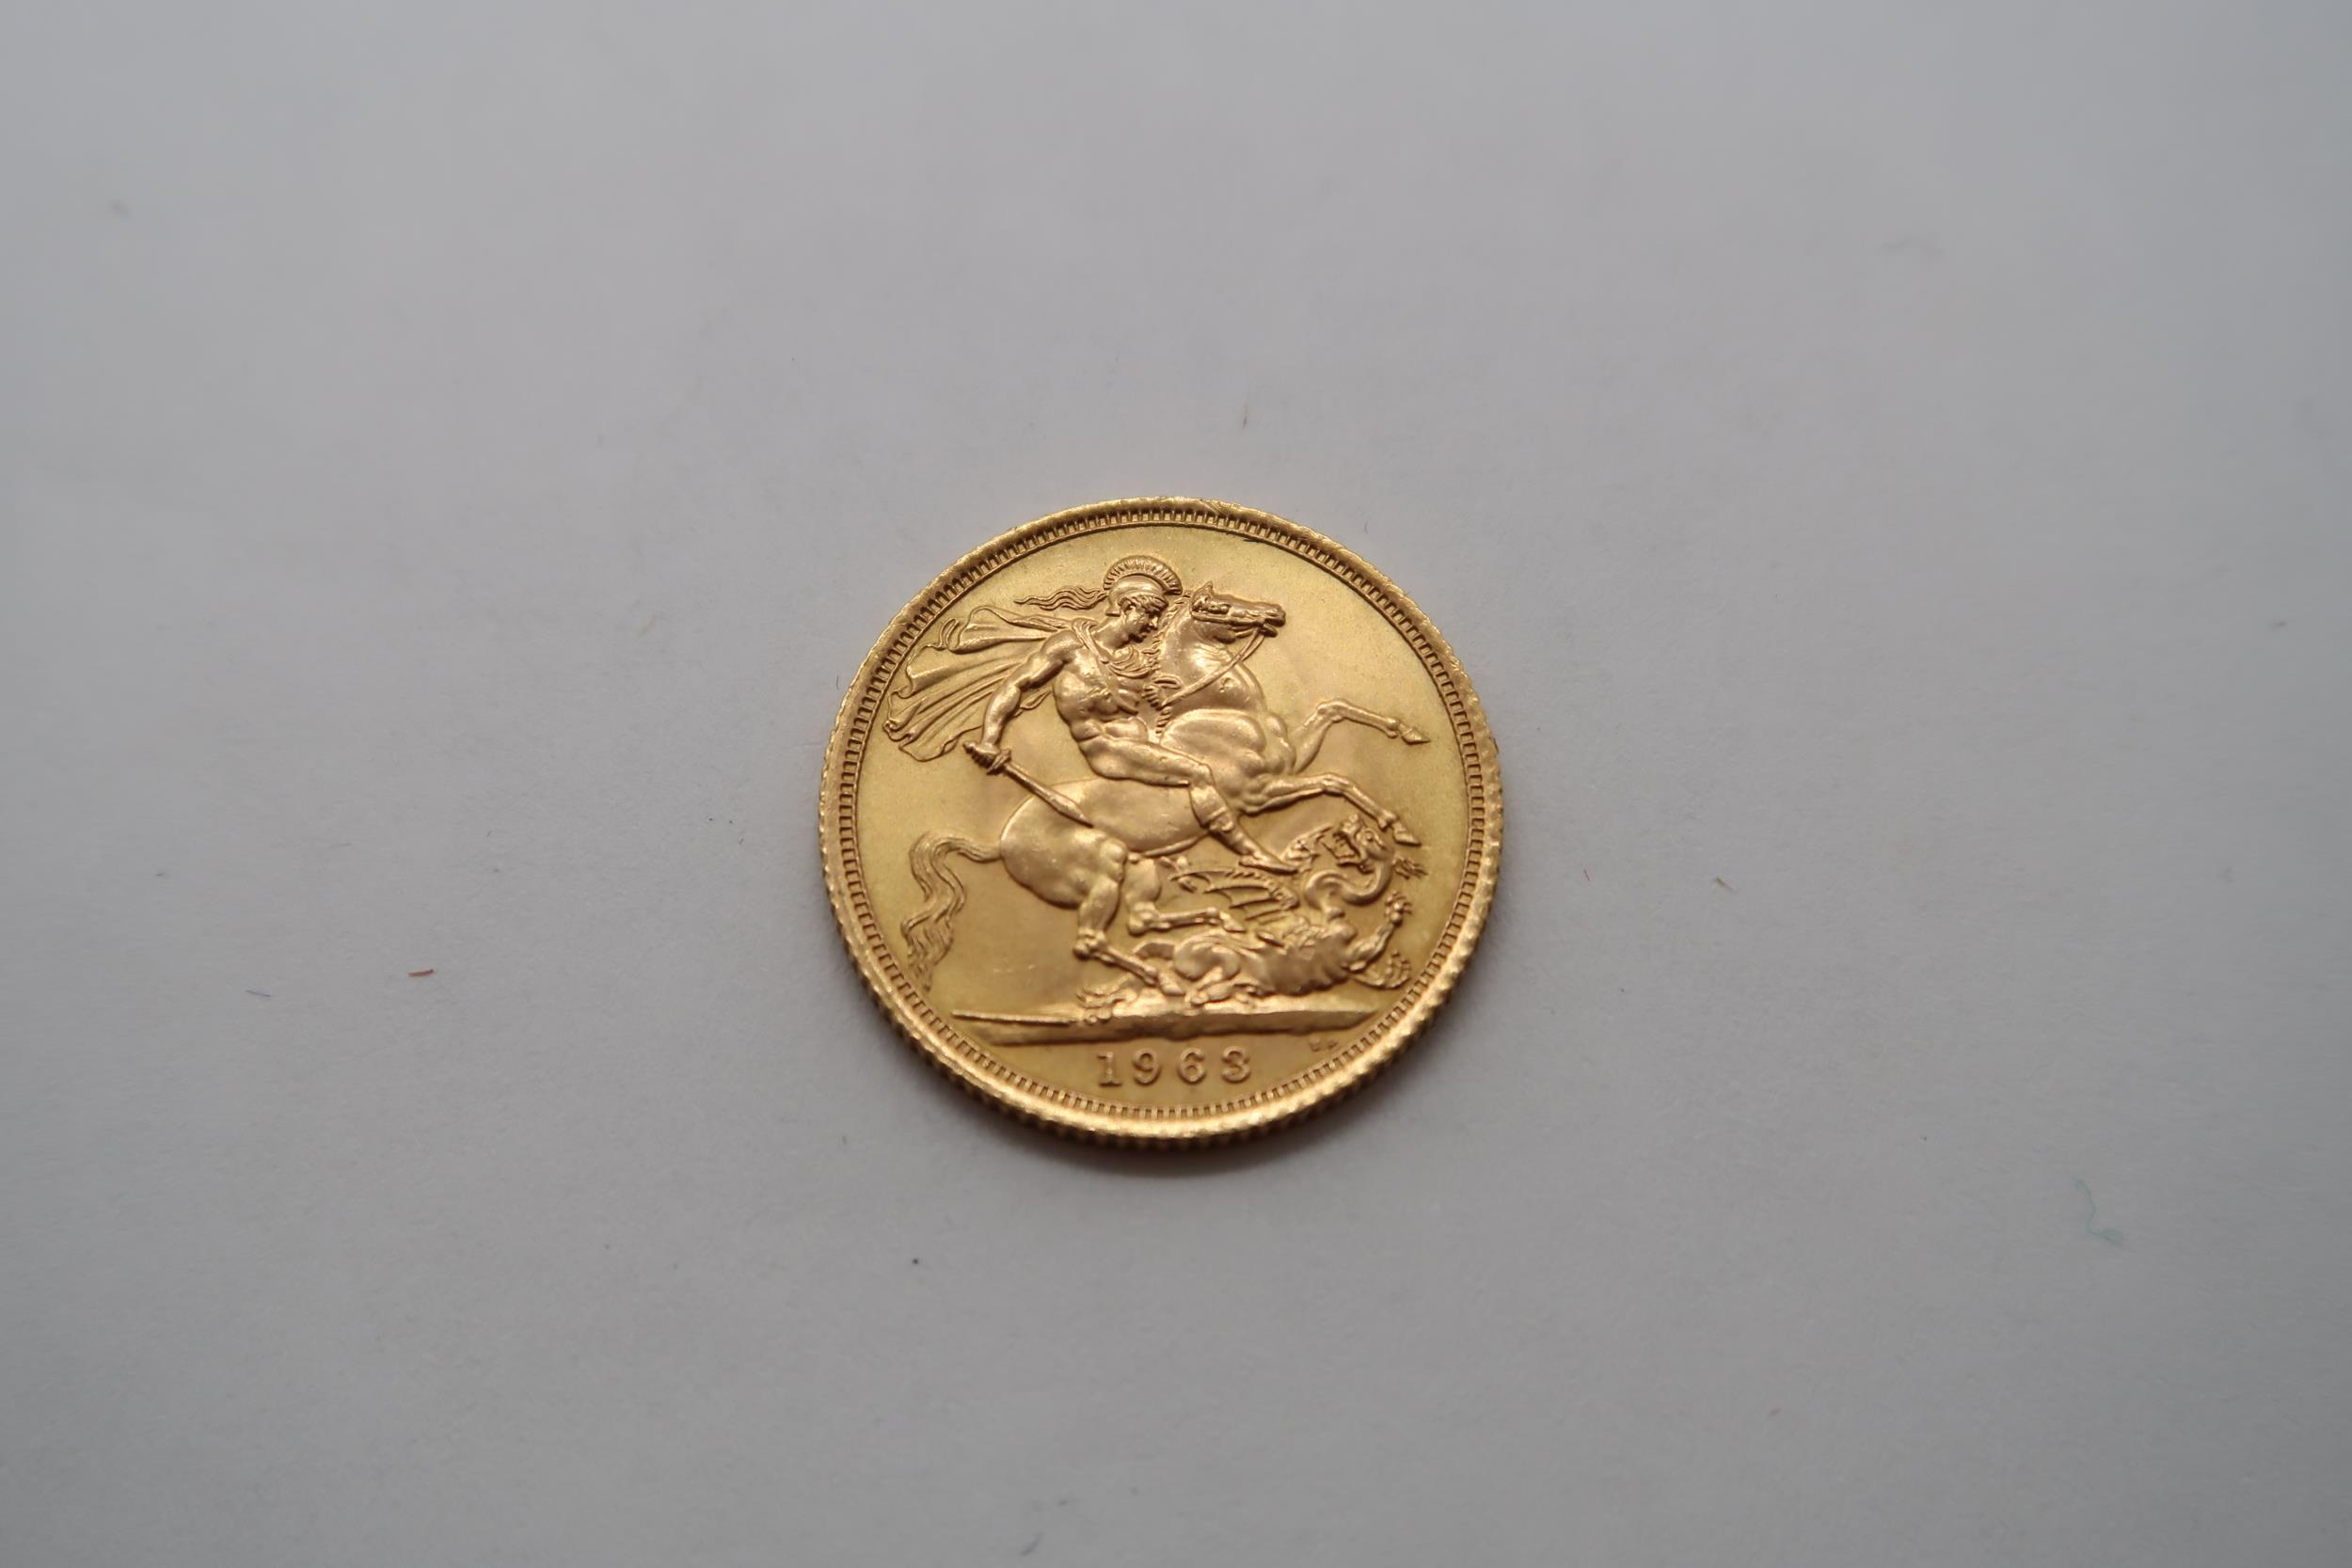 A 1963 full gold sovereign, approx 7.98 grams